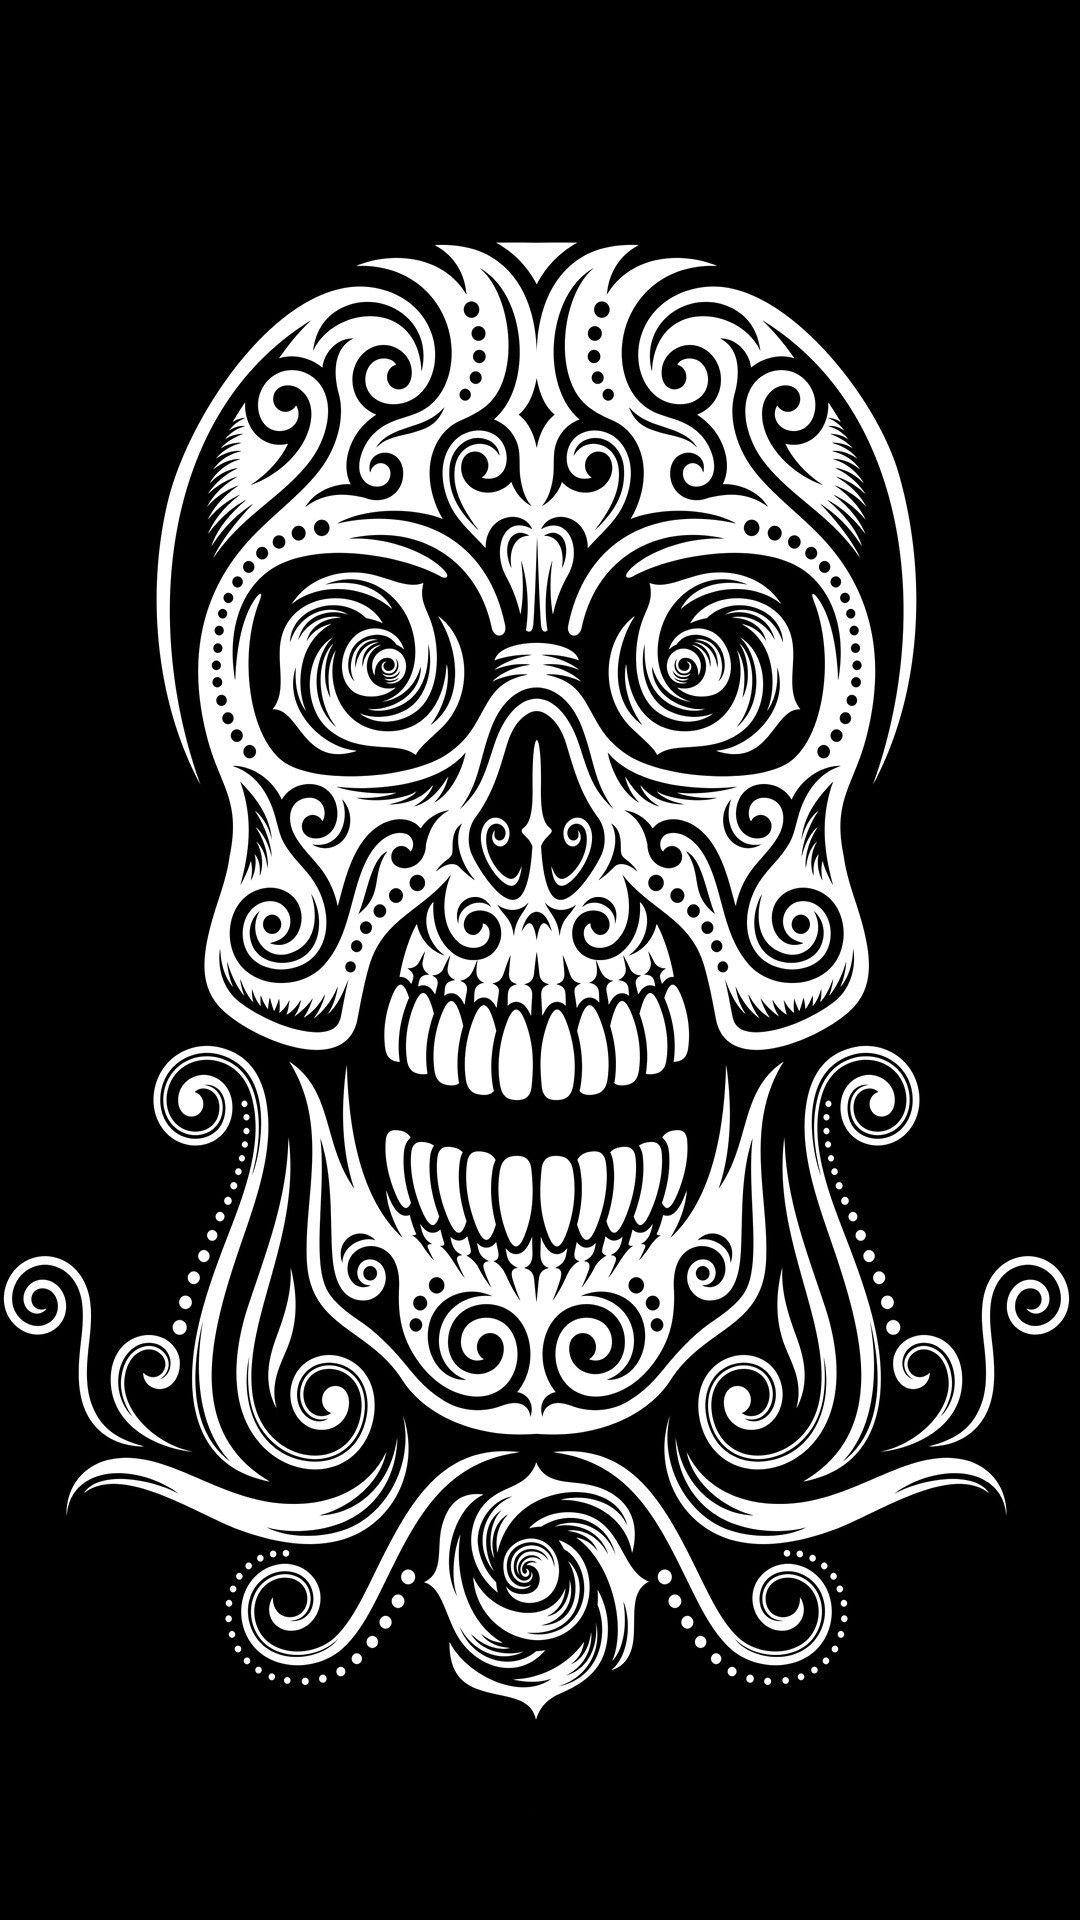 New Tribal Pattern Wallpaper Black and White. The Black Posters